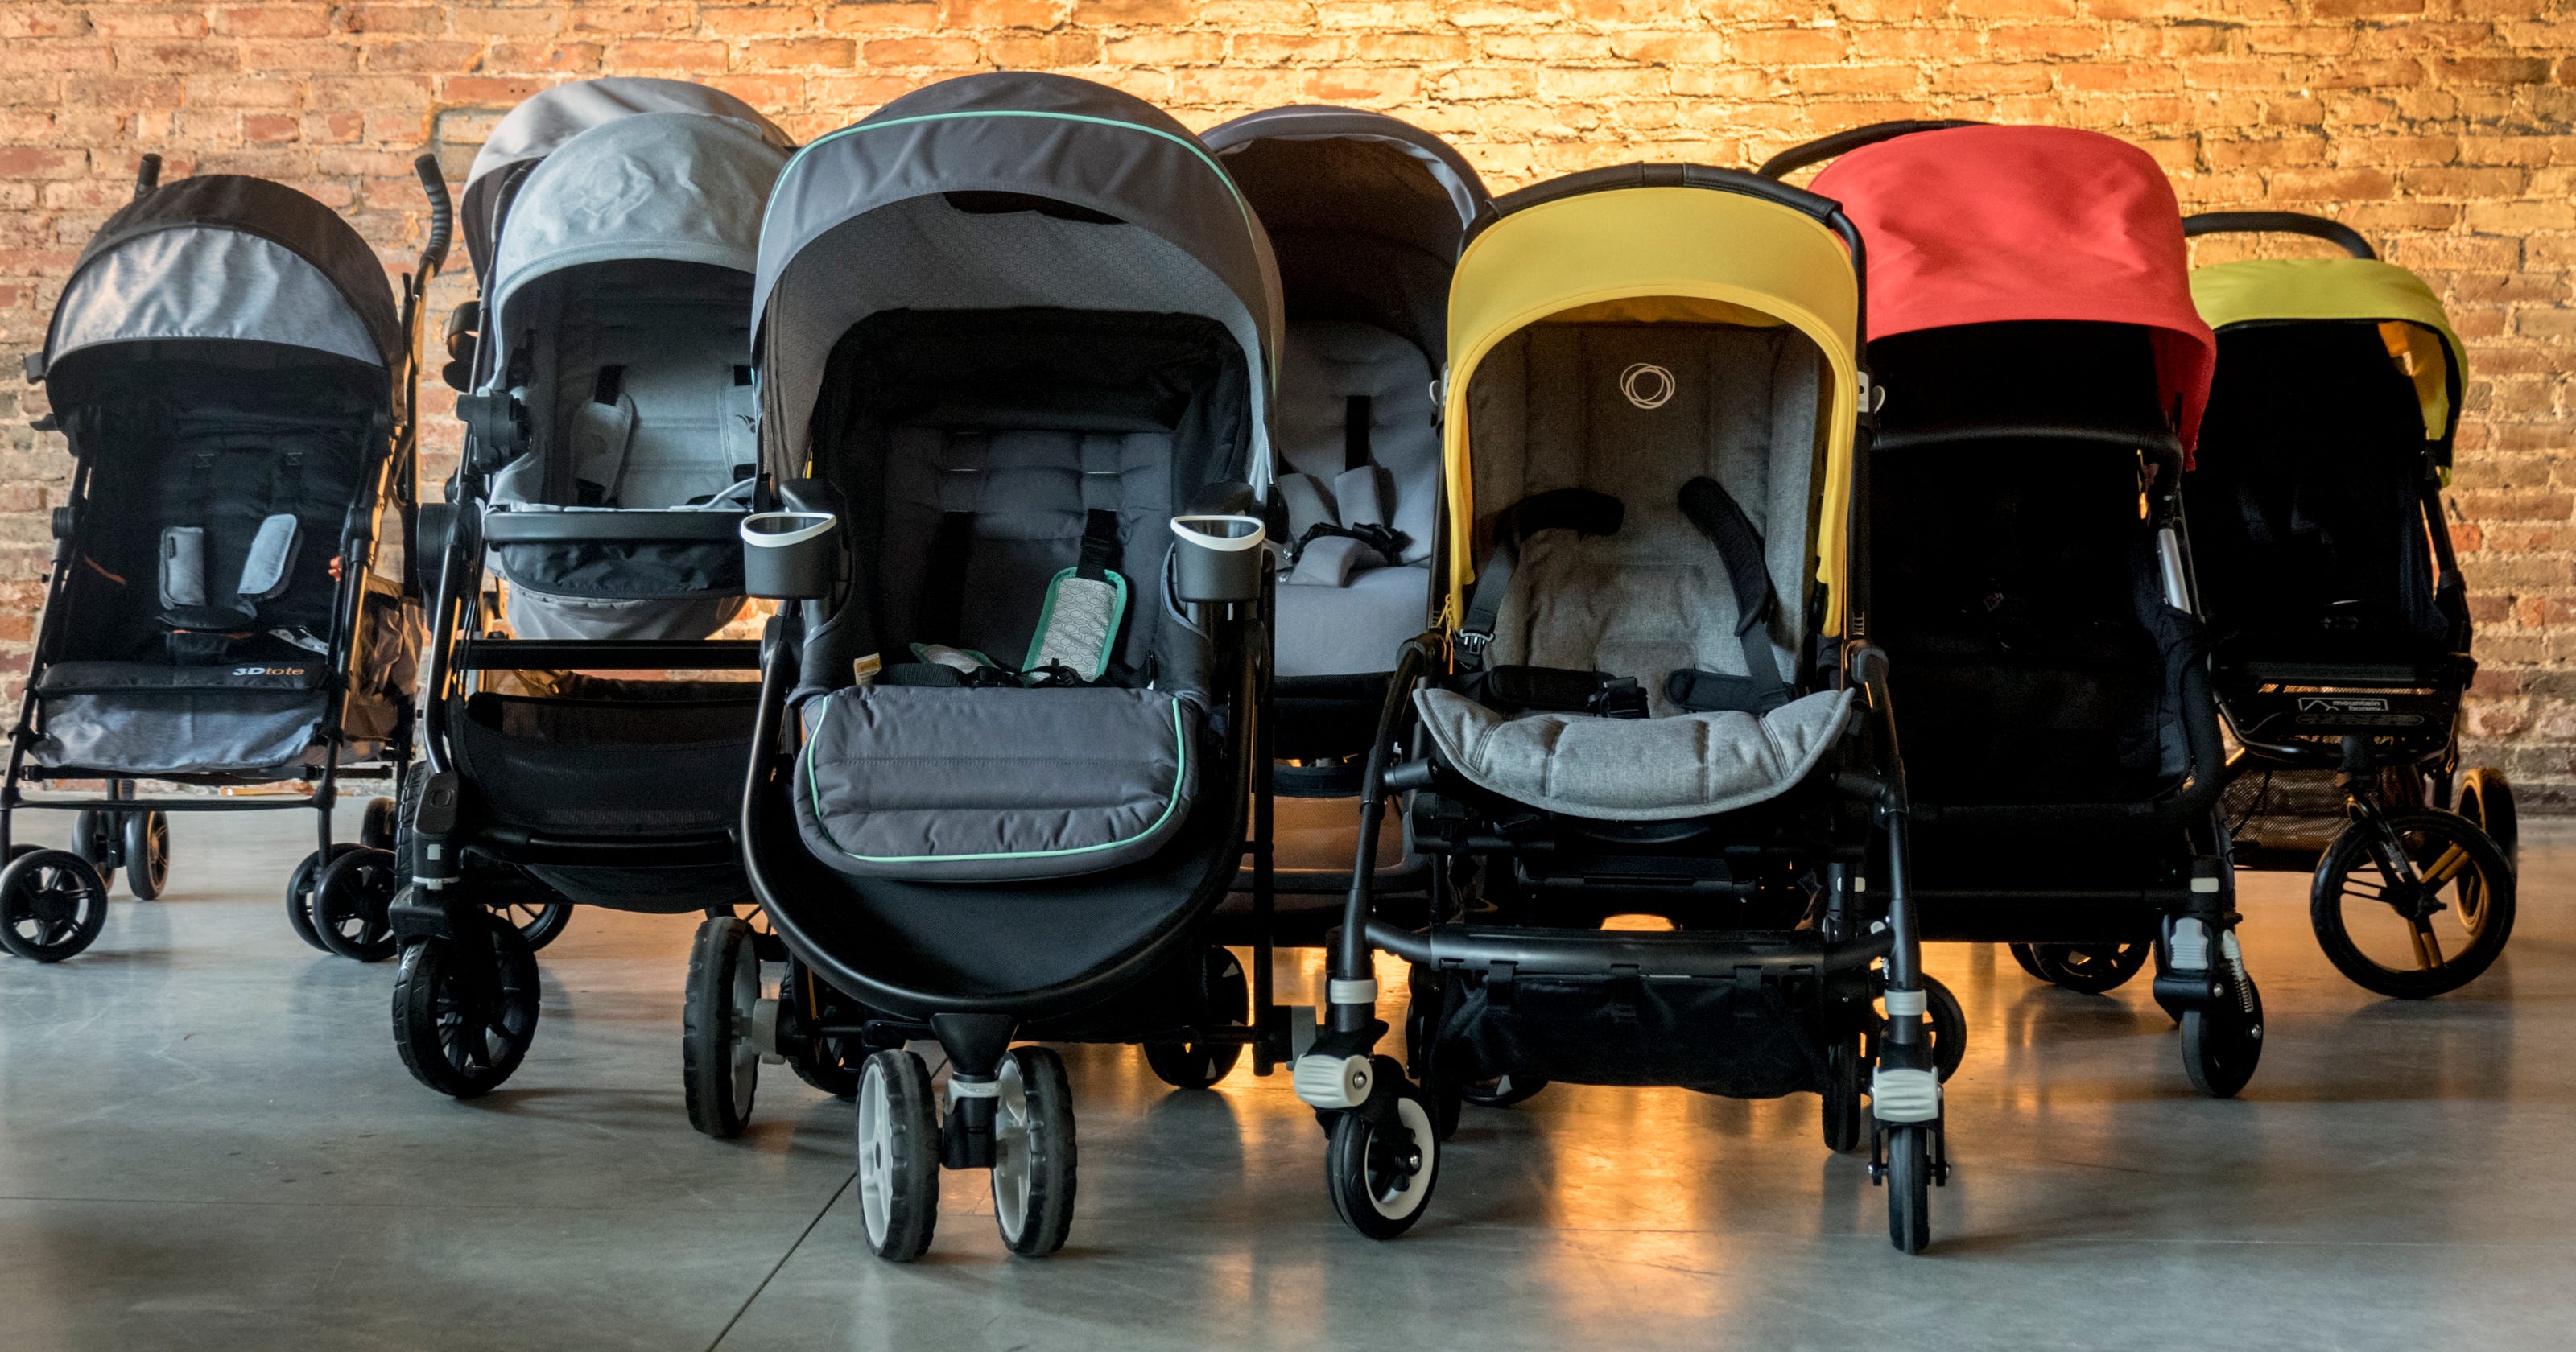 The 8 best strollers of 2017